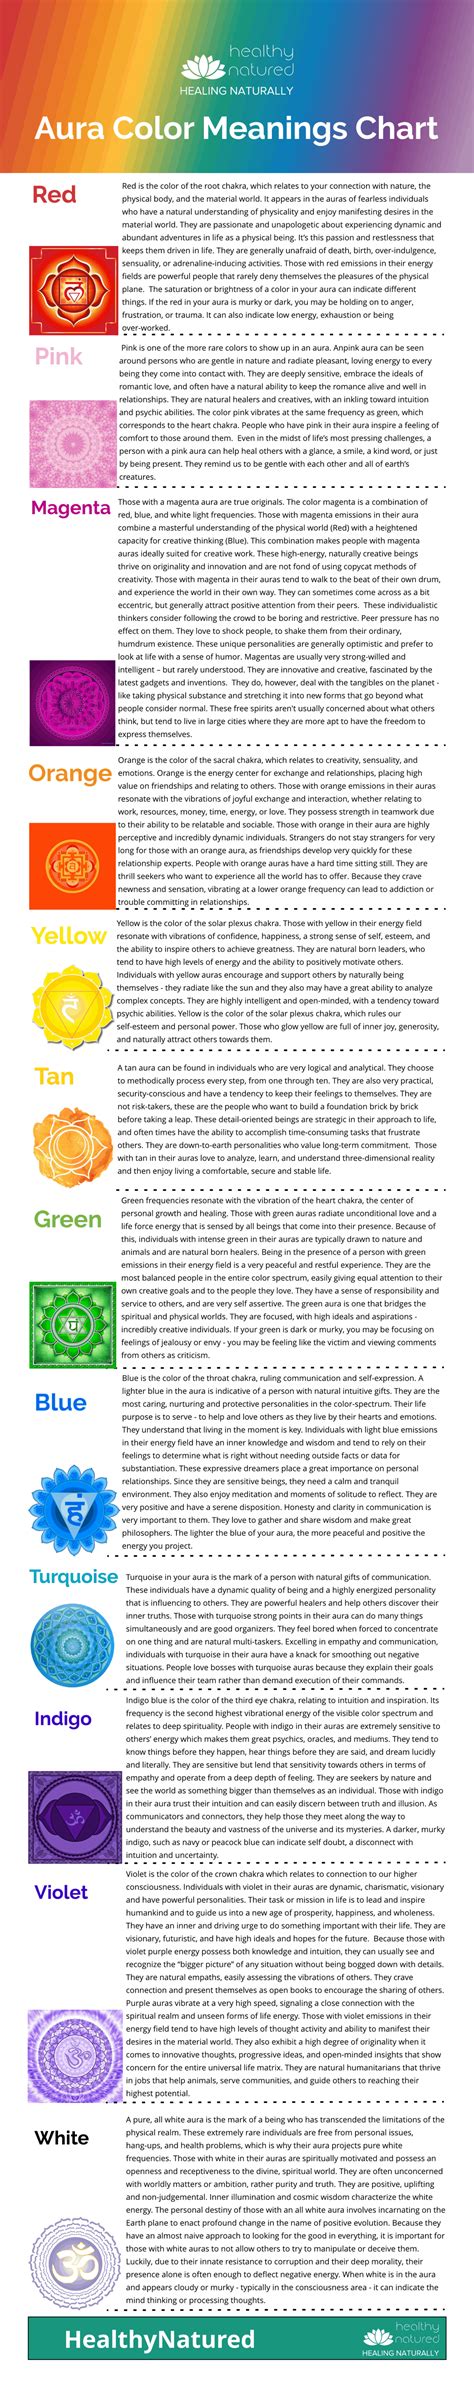 Aura Colors Chart Color Meanings Aura Colors Meaning Aura Colors